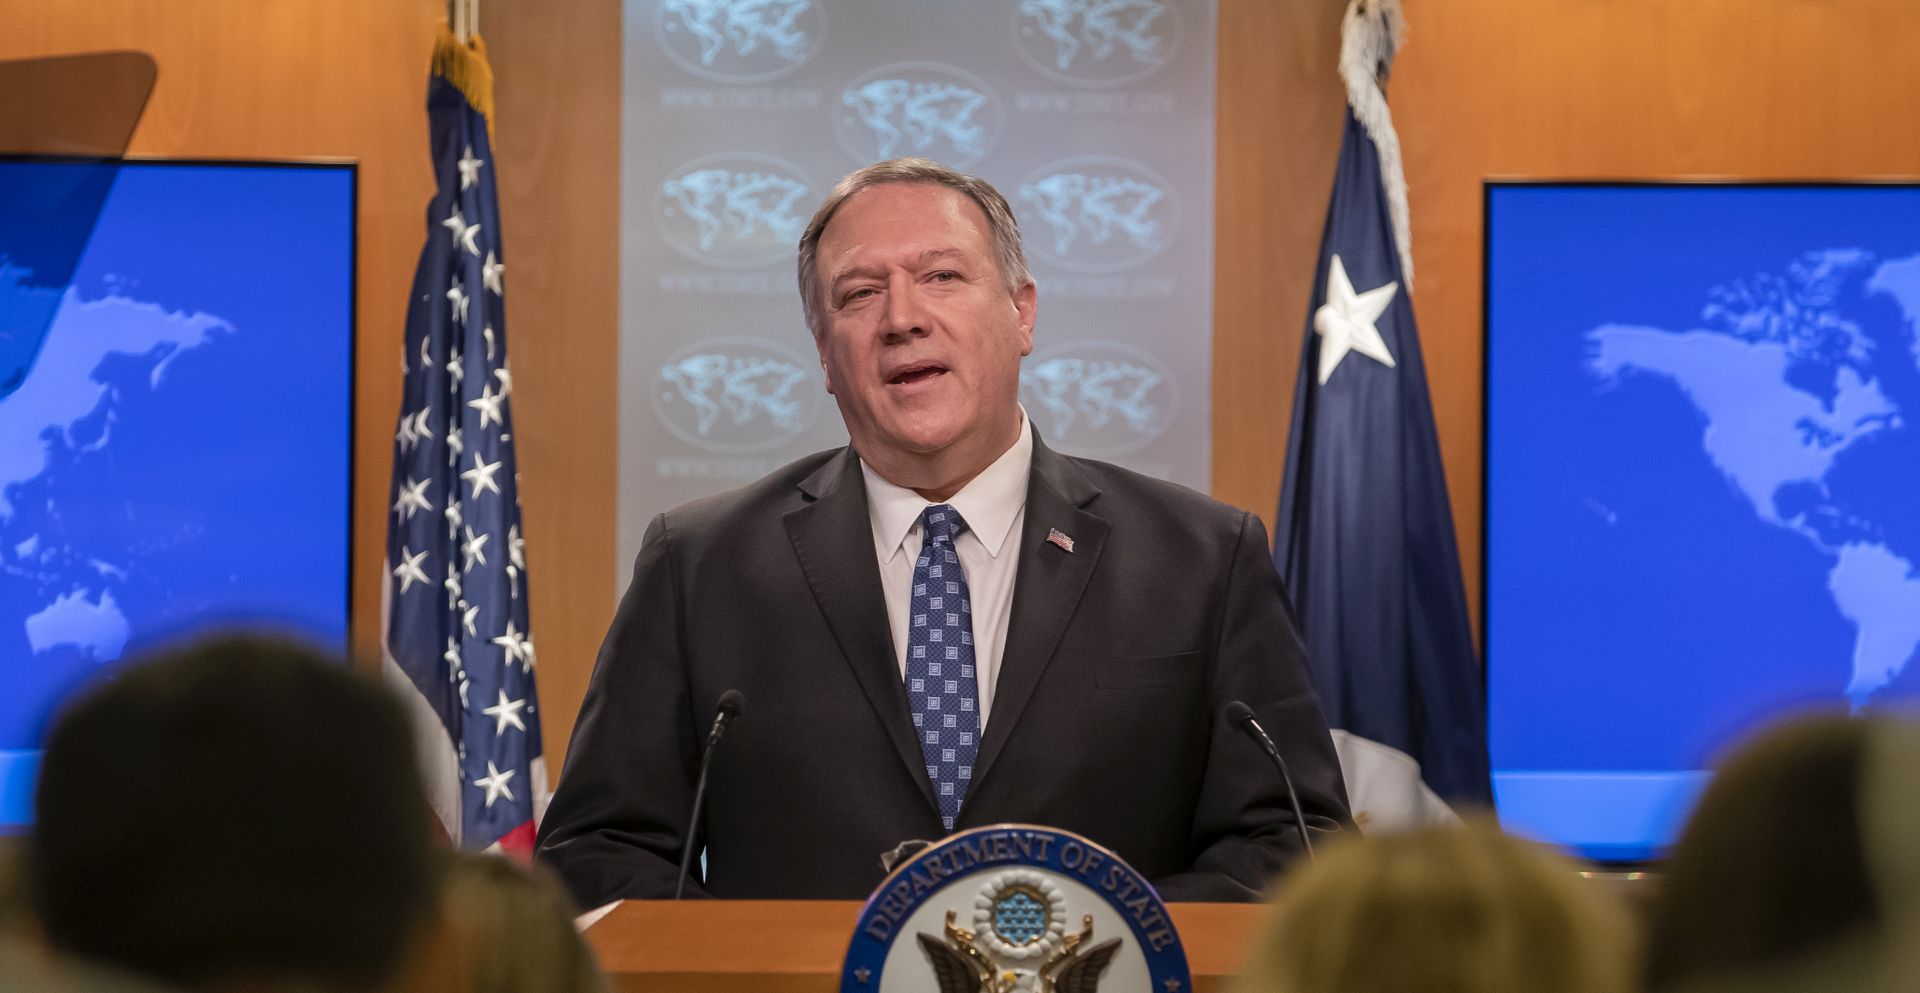 epa08110517 US Secretary of State Mike Pompeo speaks to the news media at the State Department in Washington, DC, USA, 07 January 2020. Pompeo's remarks come during heightened tensions with Iran and reports that he will not run for a Kansas US Senate seat.  EPA/ERIK S. LESSER